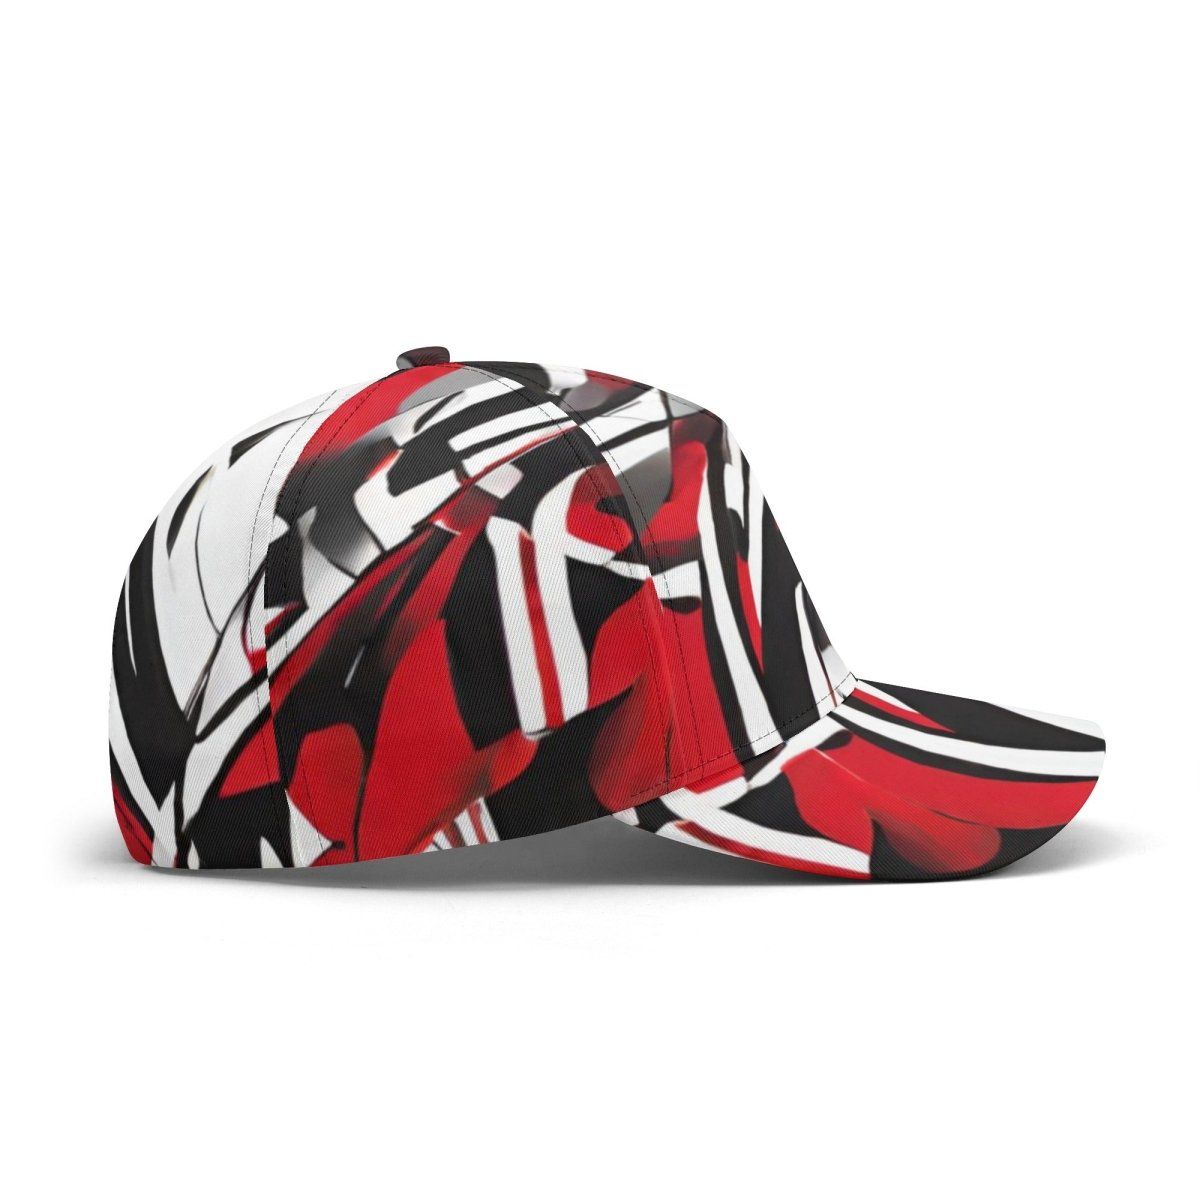 Red Black Grey White All-Over Print Baseball CapRed Black Grey and White All-Over Print Baseball Cap Add Some Style to Your Outfit - Iron Phoenix GHG